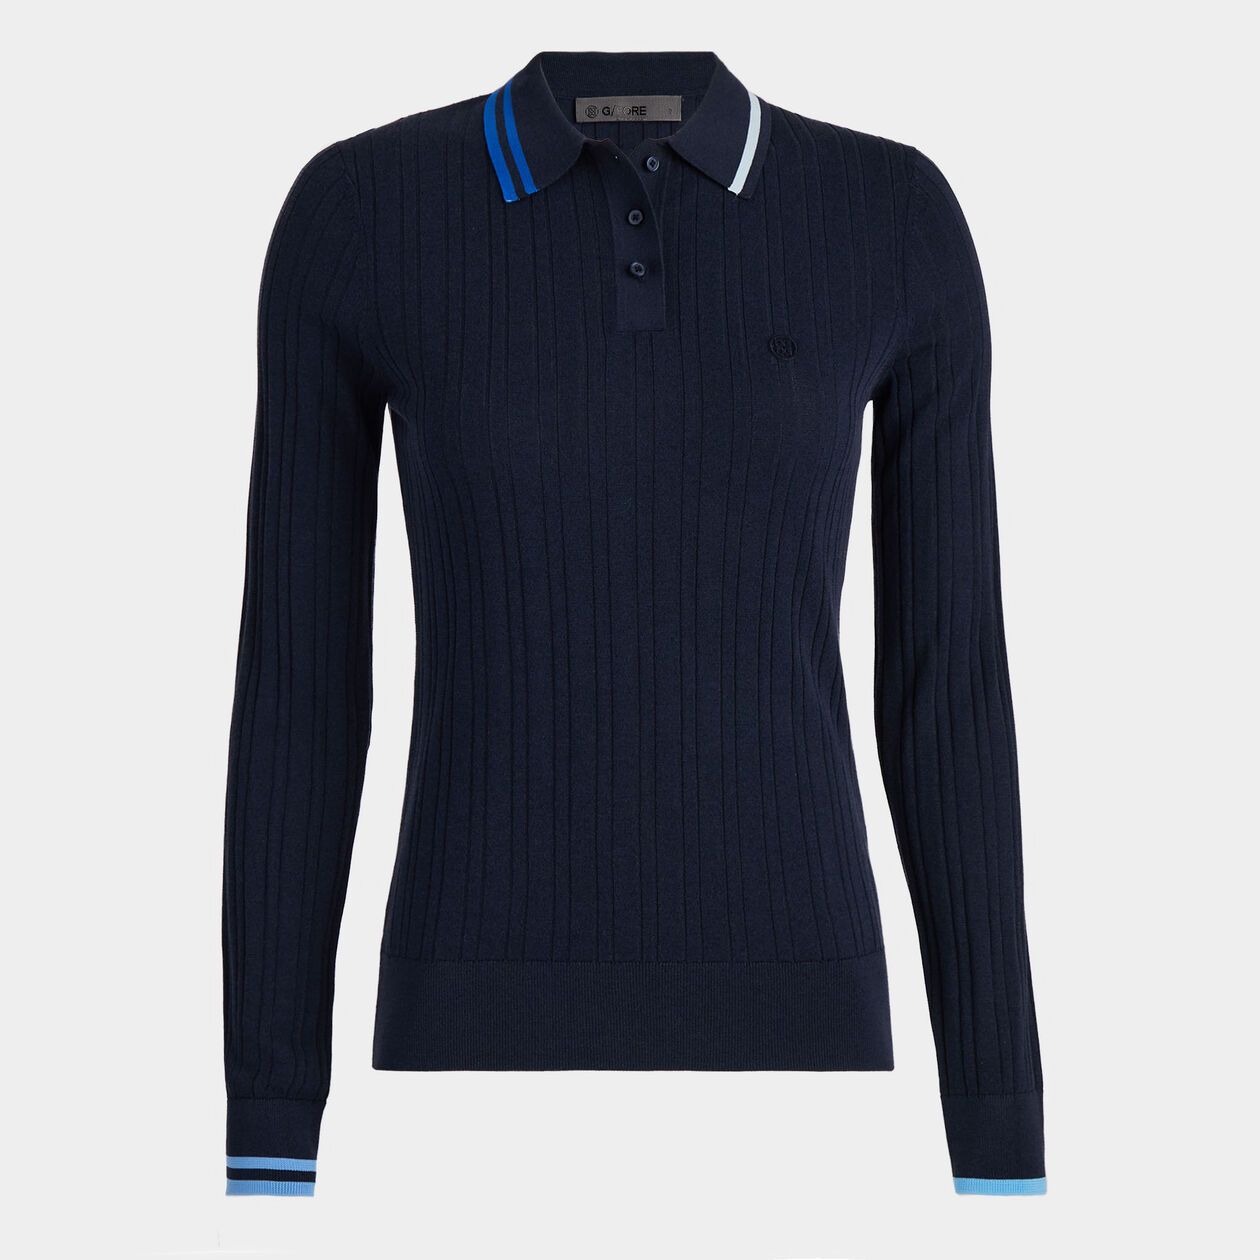 CONTRAST STRIPE COTTON BLEND RIBBED LONG SLEEVE KNIT POLO | WOMEN'S POLO SHIRTS | G/FORE | G/FORE | GFORE.com